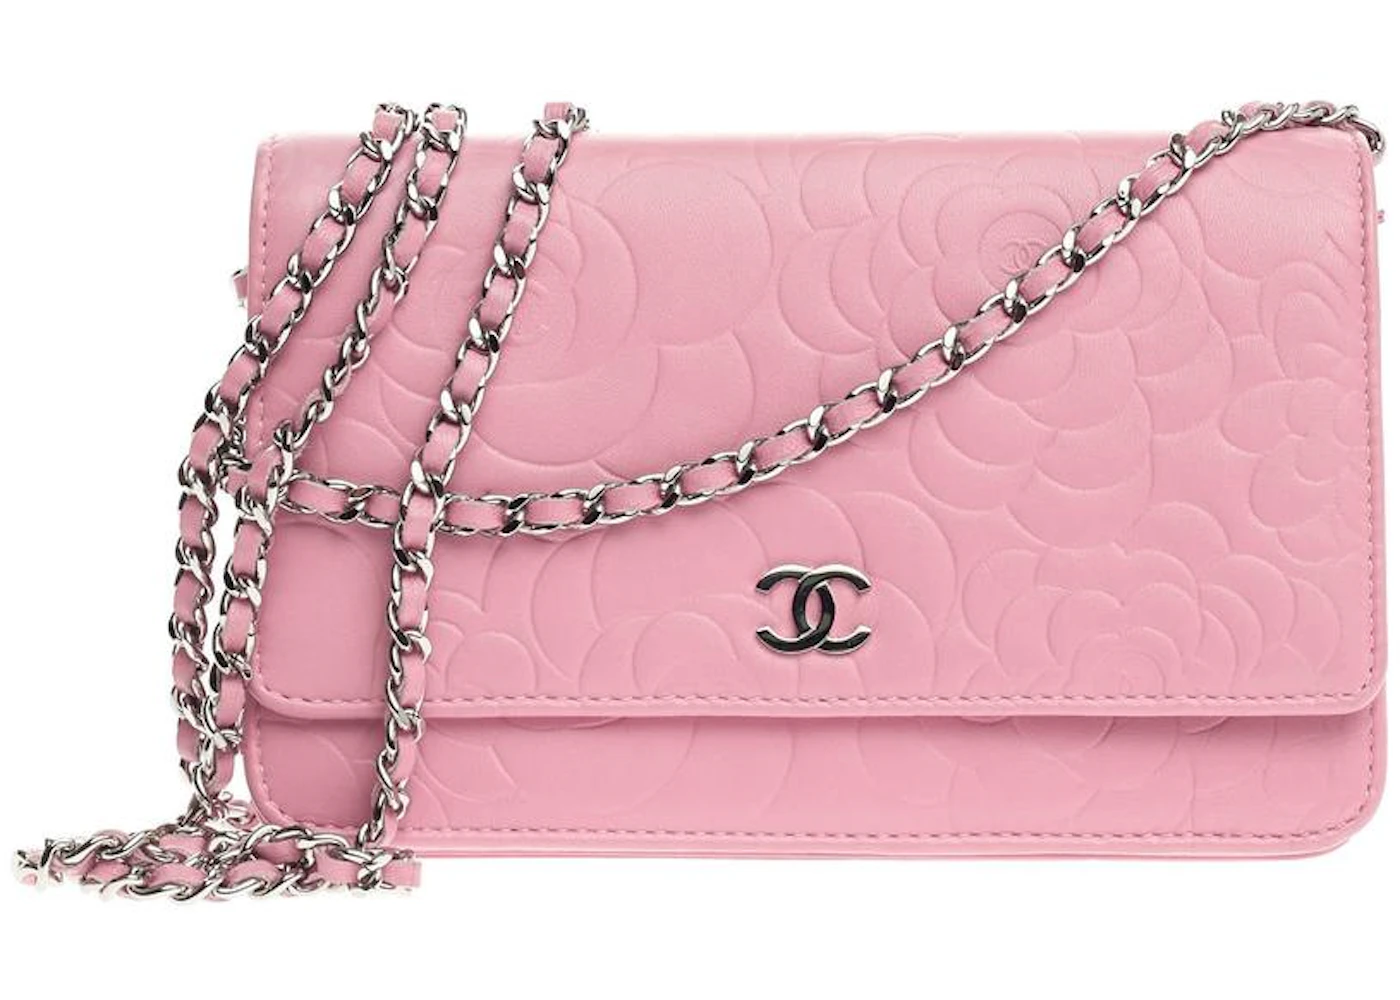 Authentic CHANEL Camellia Flower Red Mini Wallet